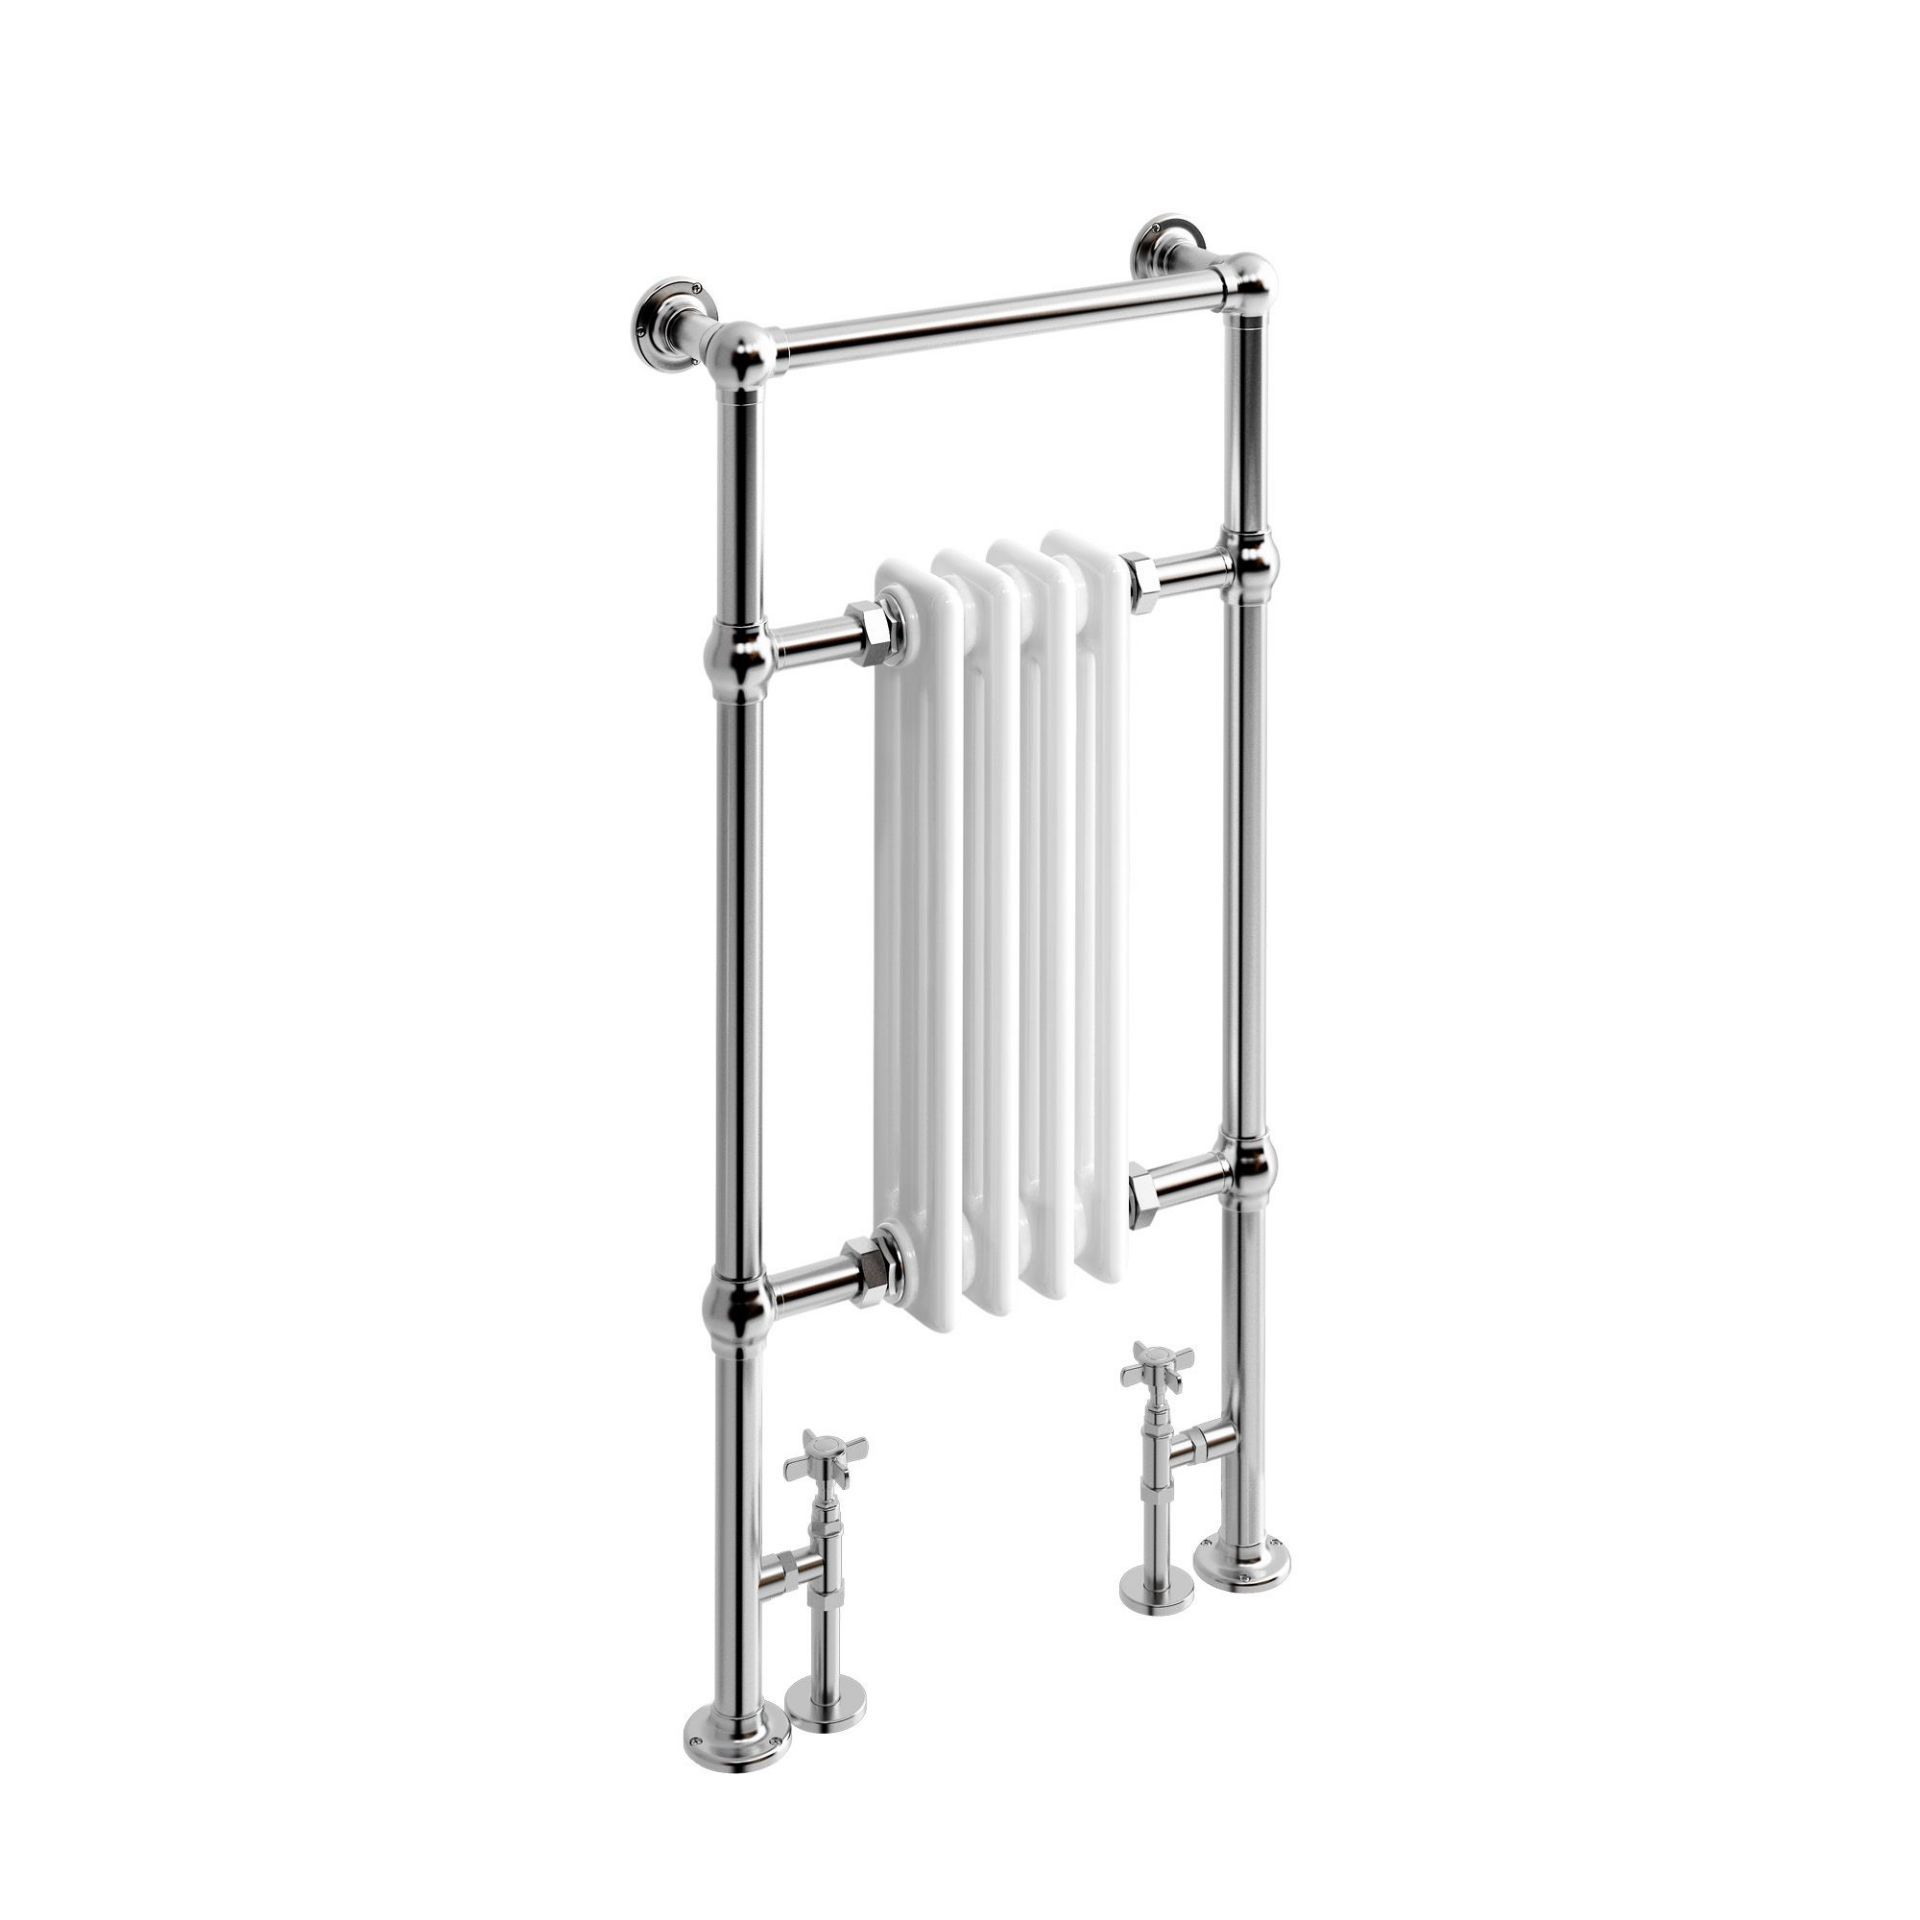 New 952X479Mm Traditional White Slim Towel Rail Radiator - Cambridge. Rt31.Rrp £469.99.Low Carbon - Image 3 of 3